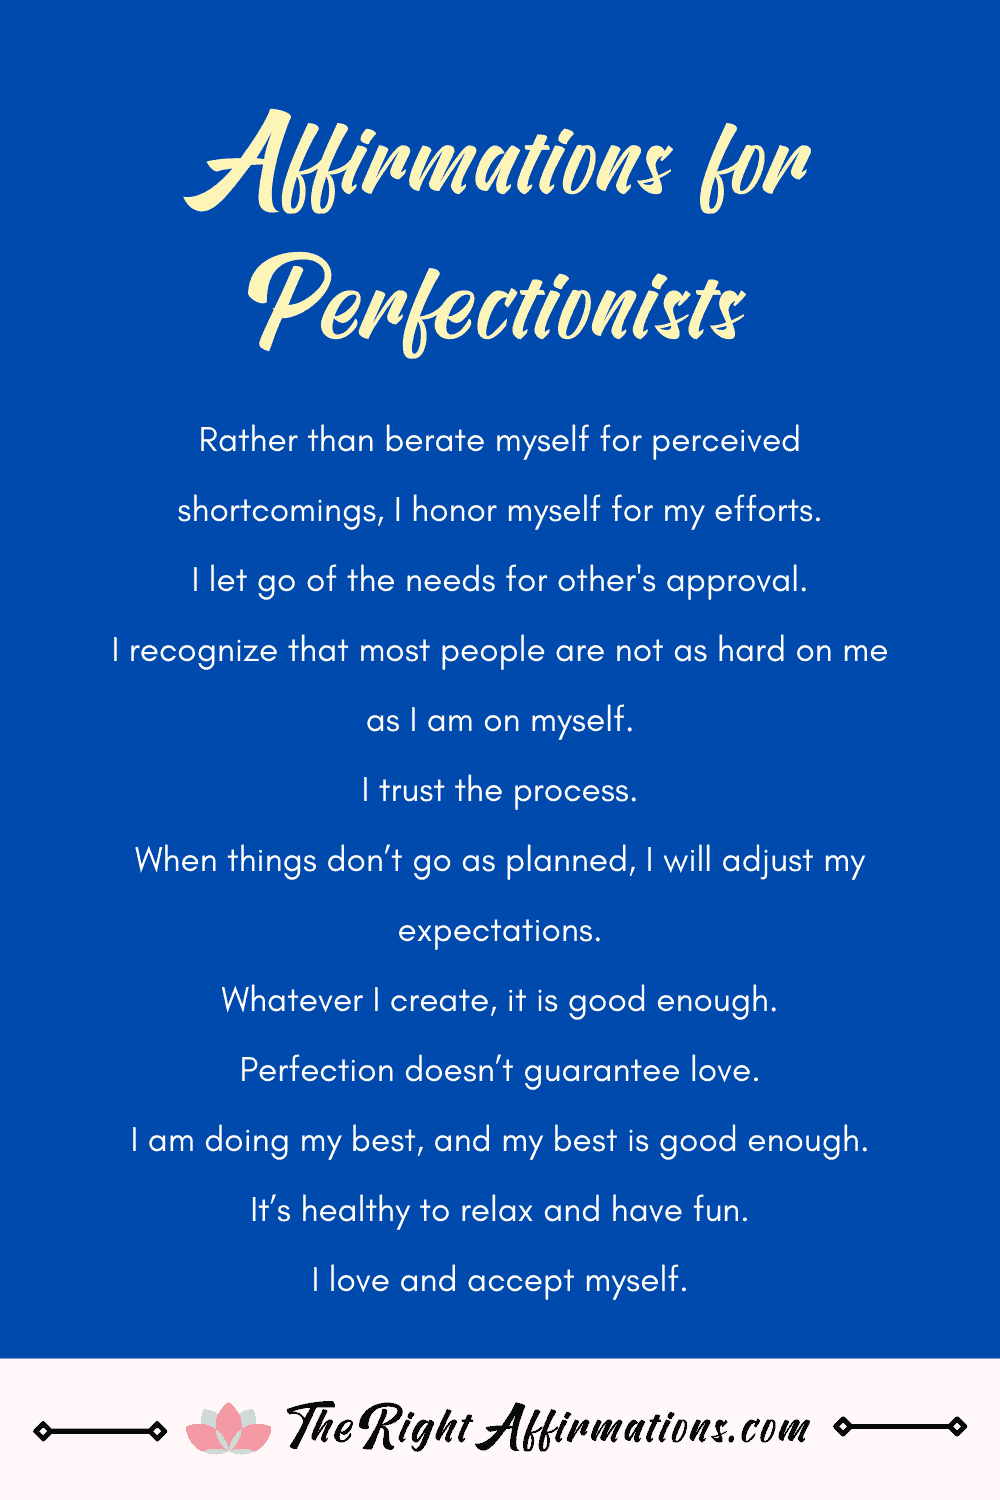 affirmations for perfectionism pinterest